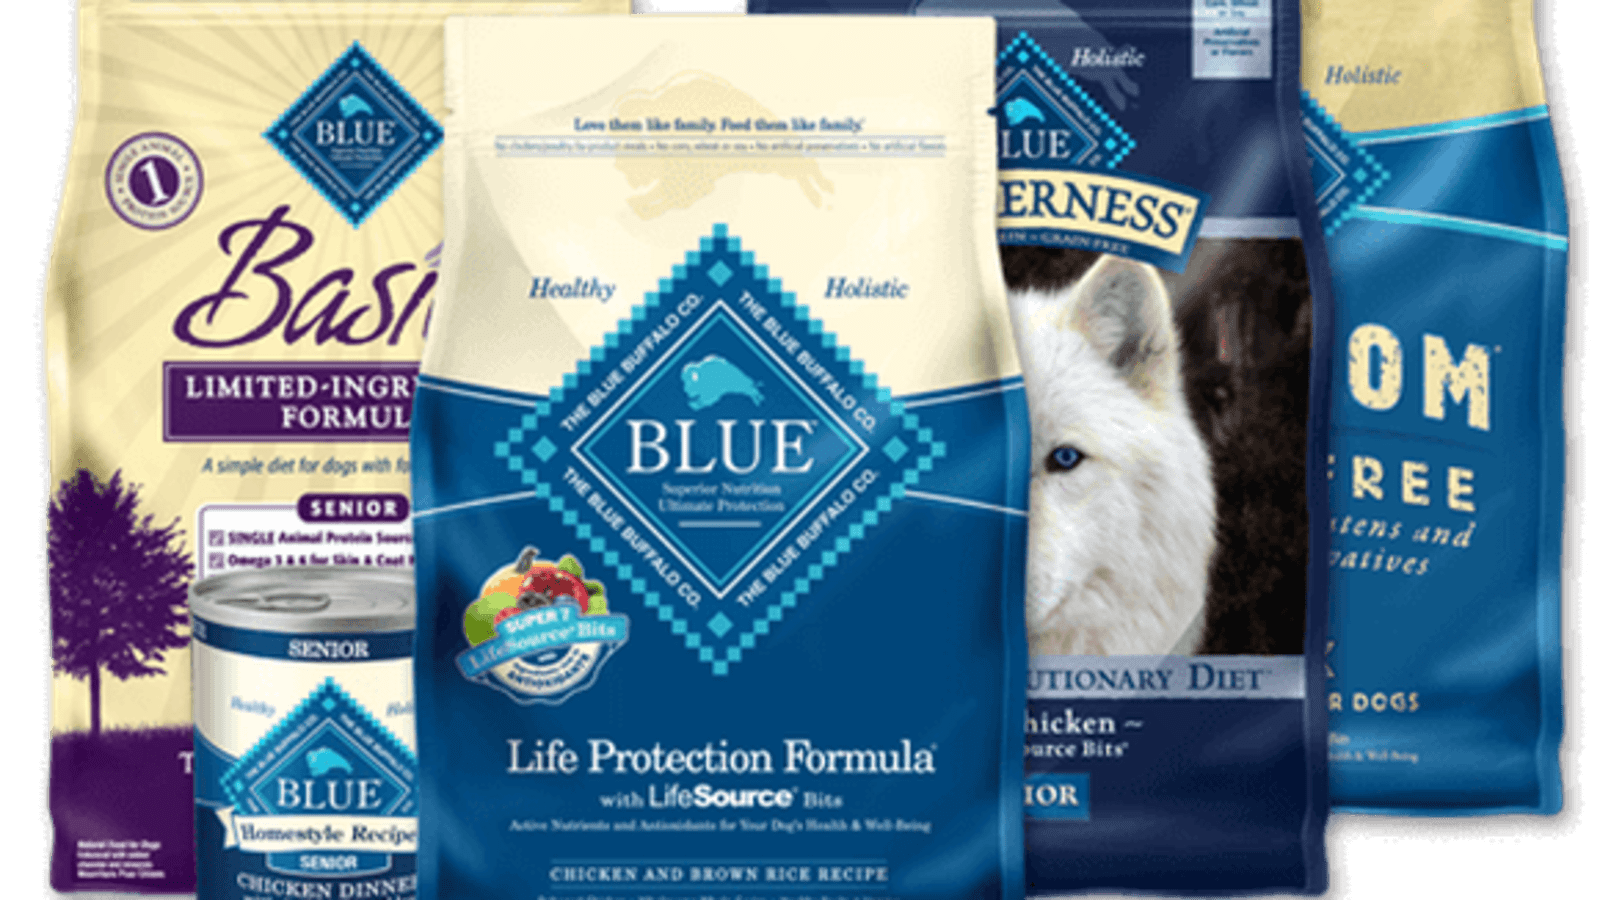 Trend towards more natural, premium pet food products boosts General Mills’ Blue Buffalo brand